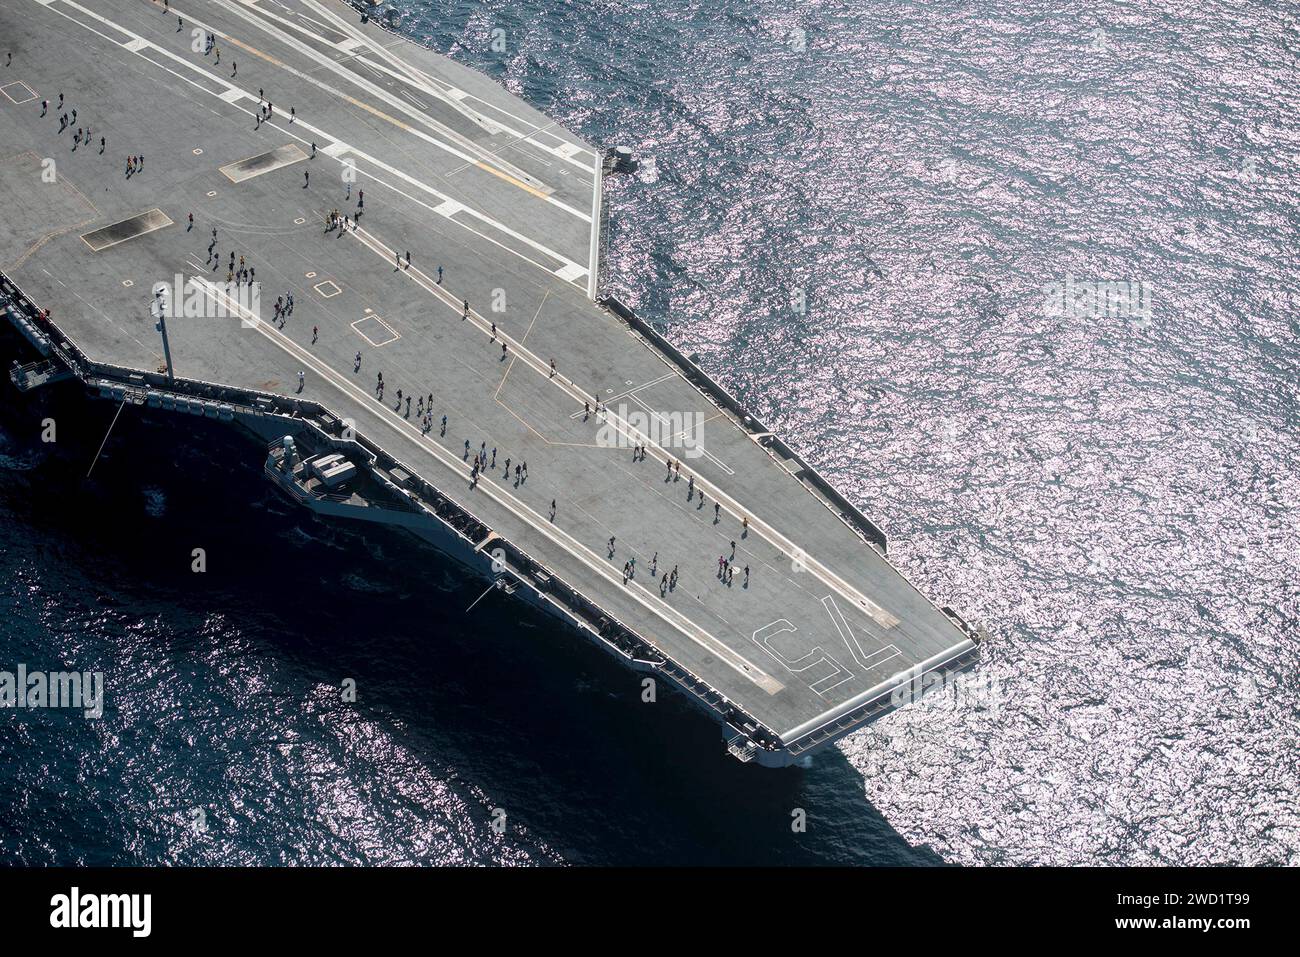 Sailors participate in a 5 kilometer run on the flight deck aboard the aircraft carrier USS Harry S. Truman. Stock Photo